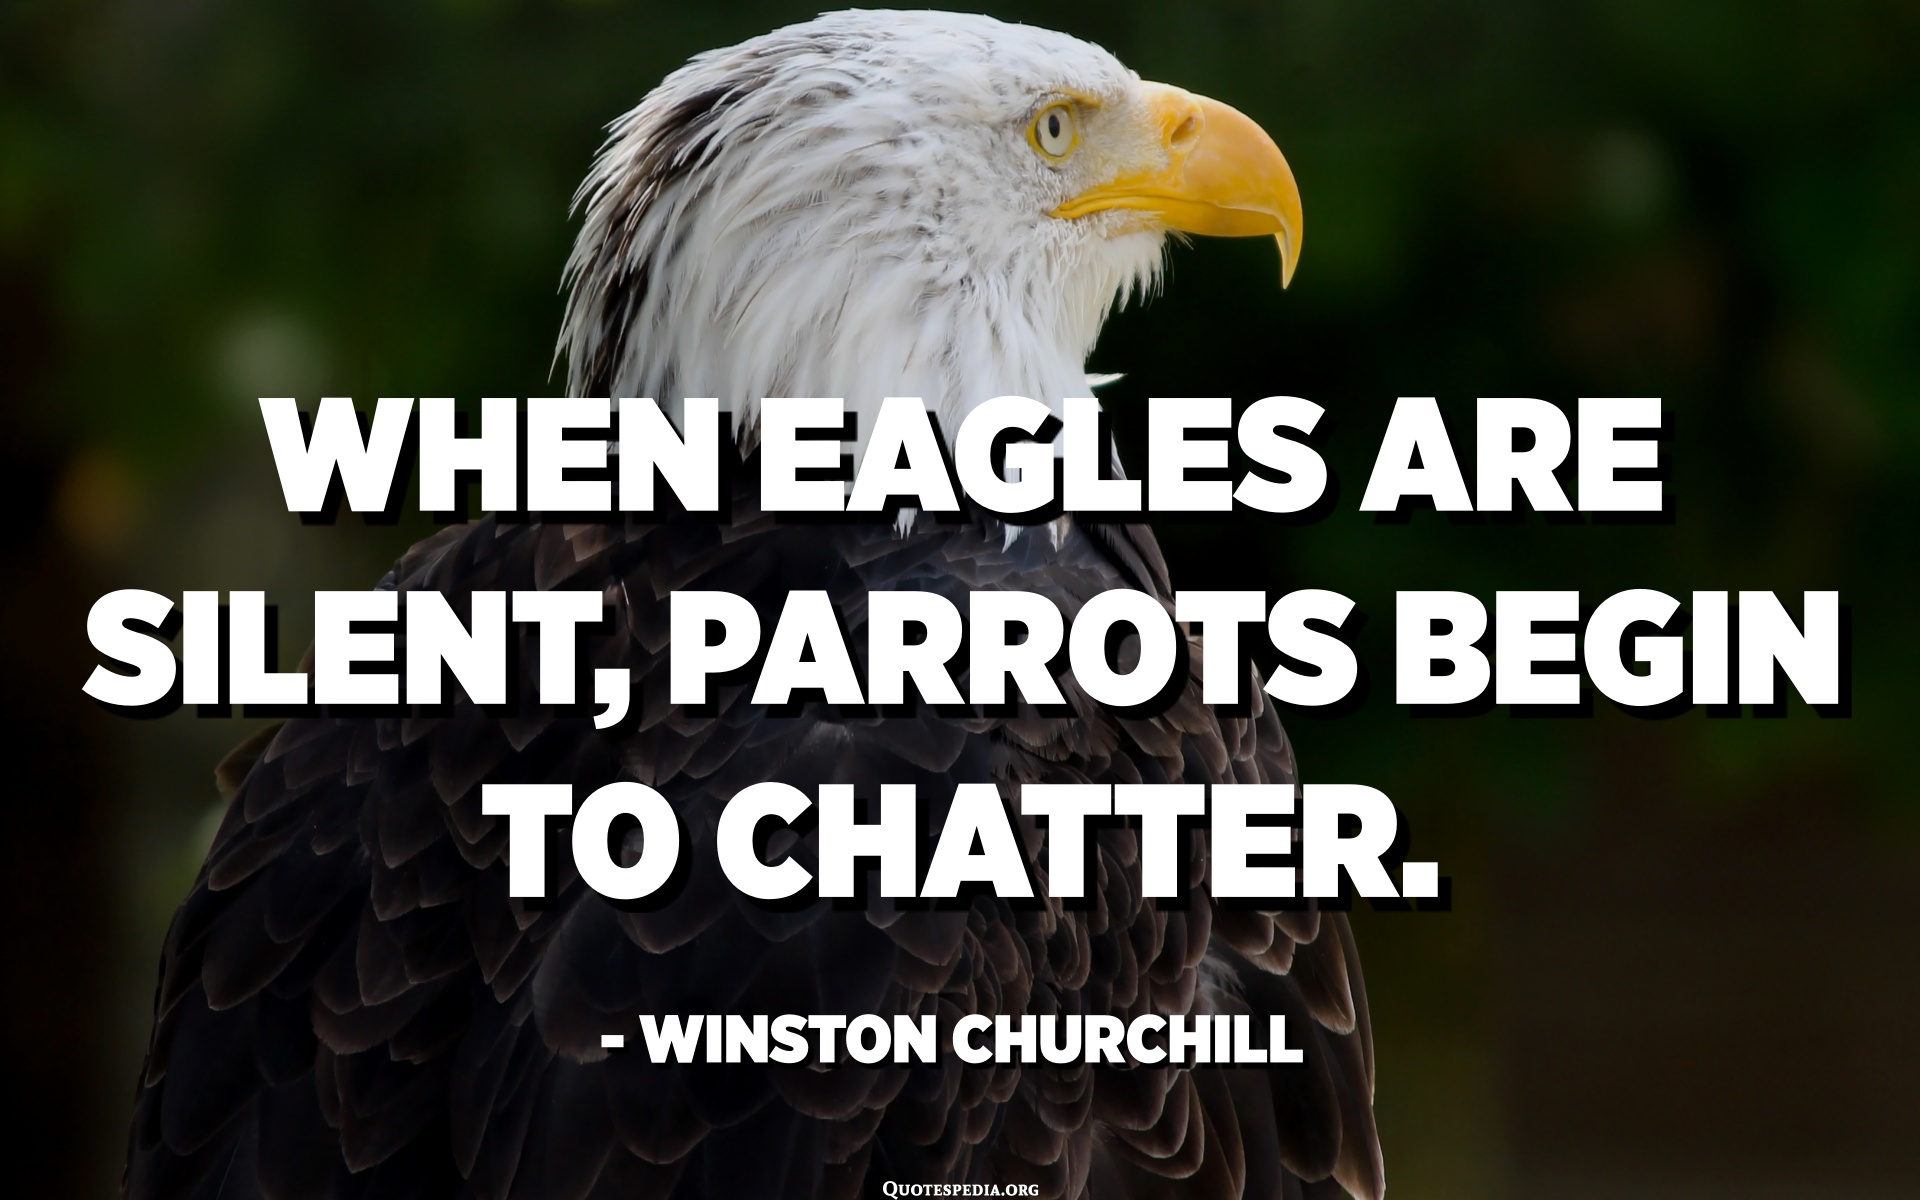 When eagles are silent, parrots begin to chatter